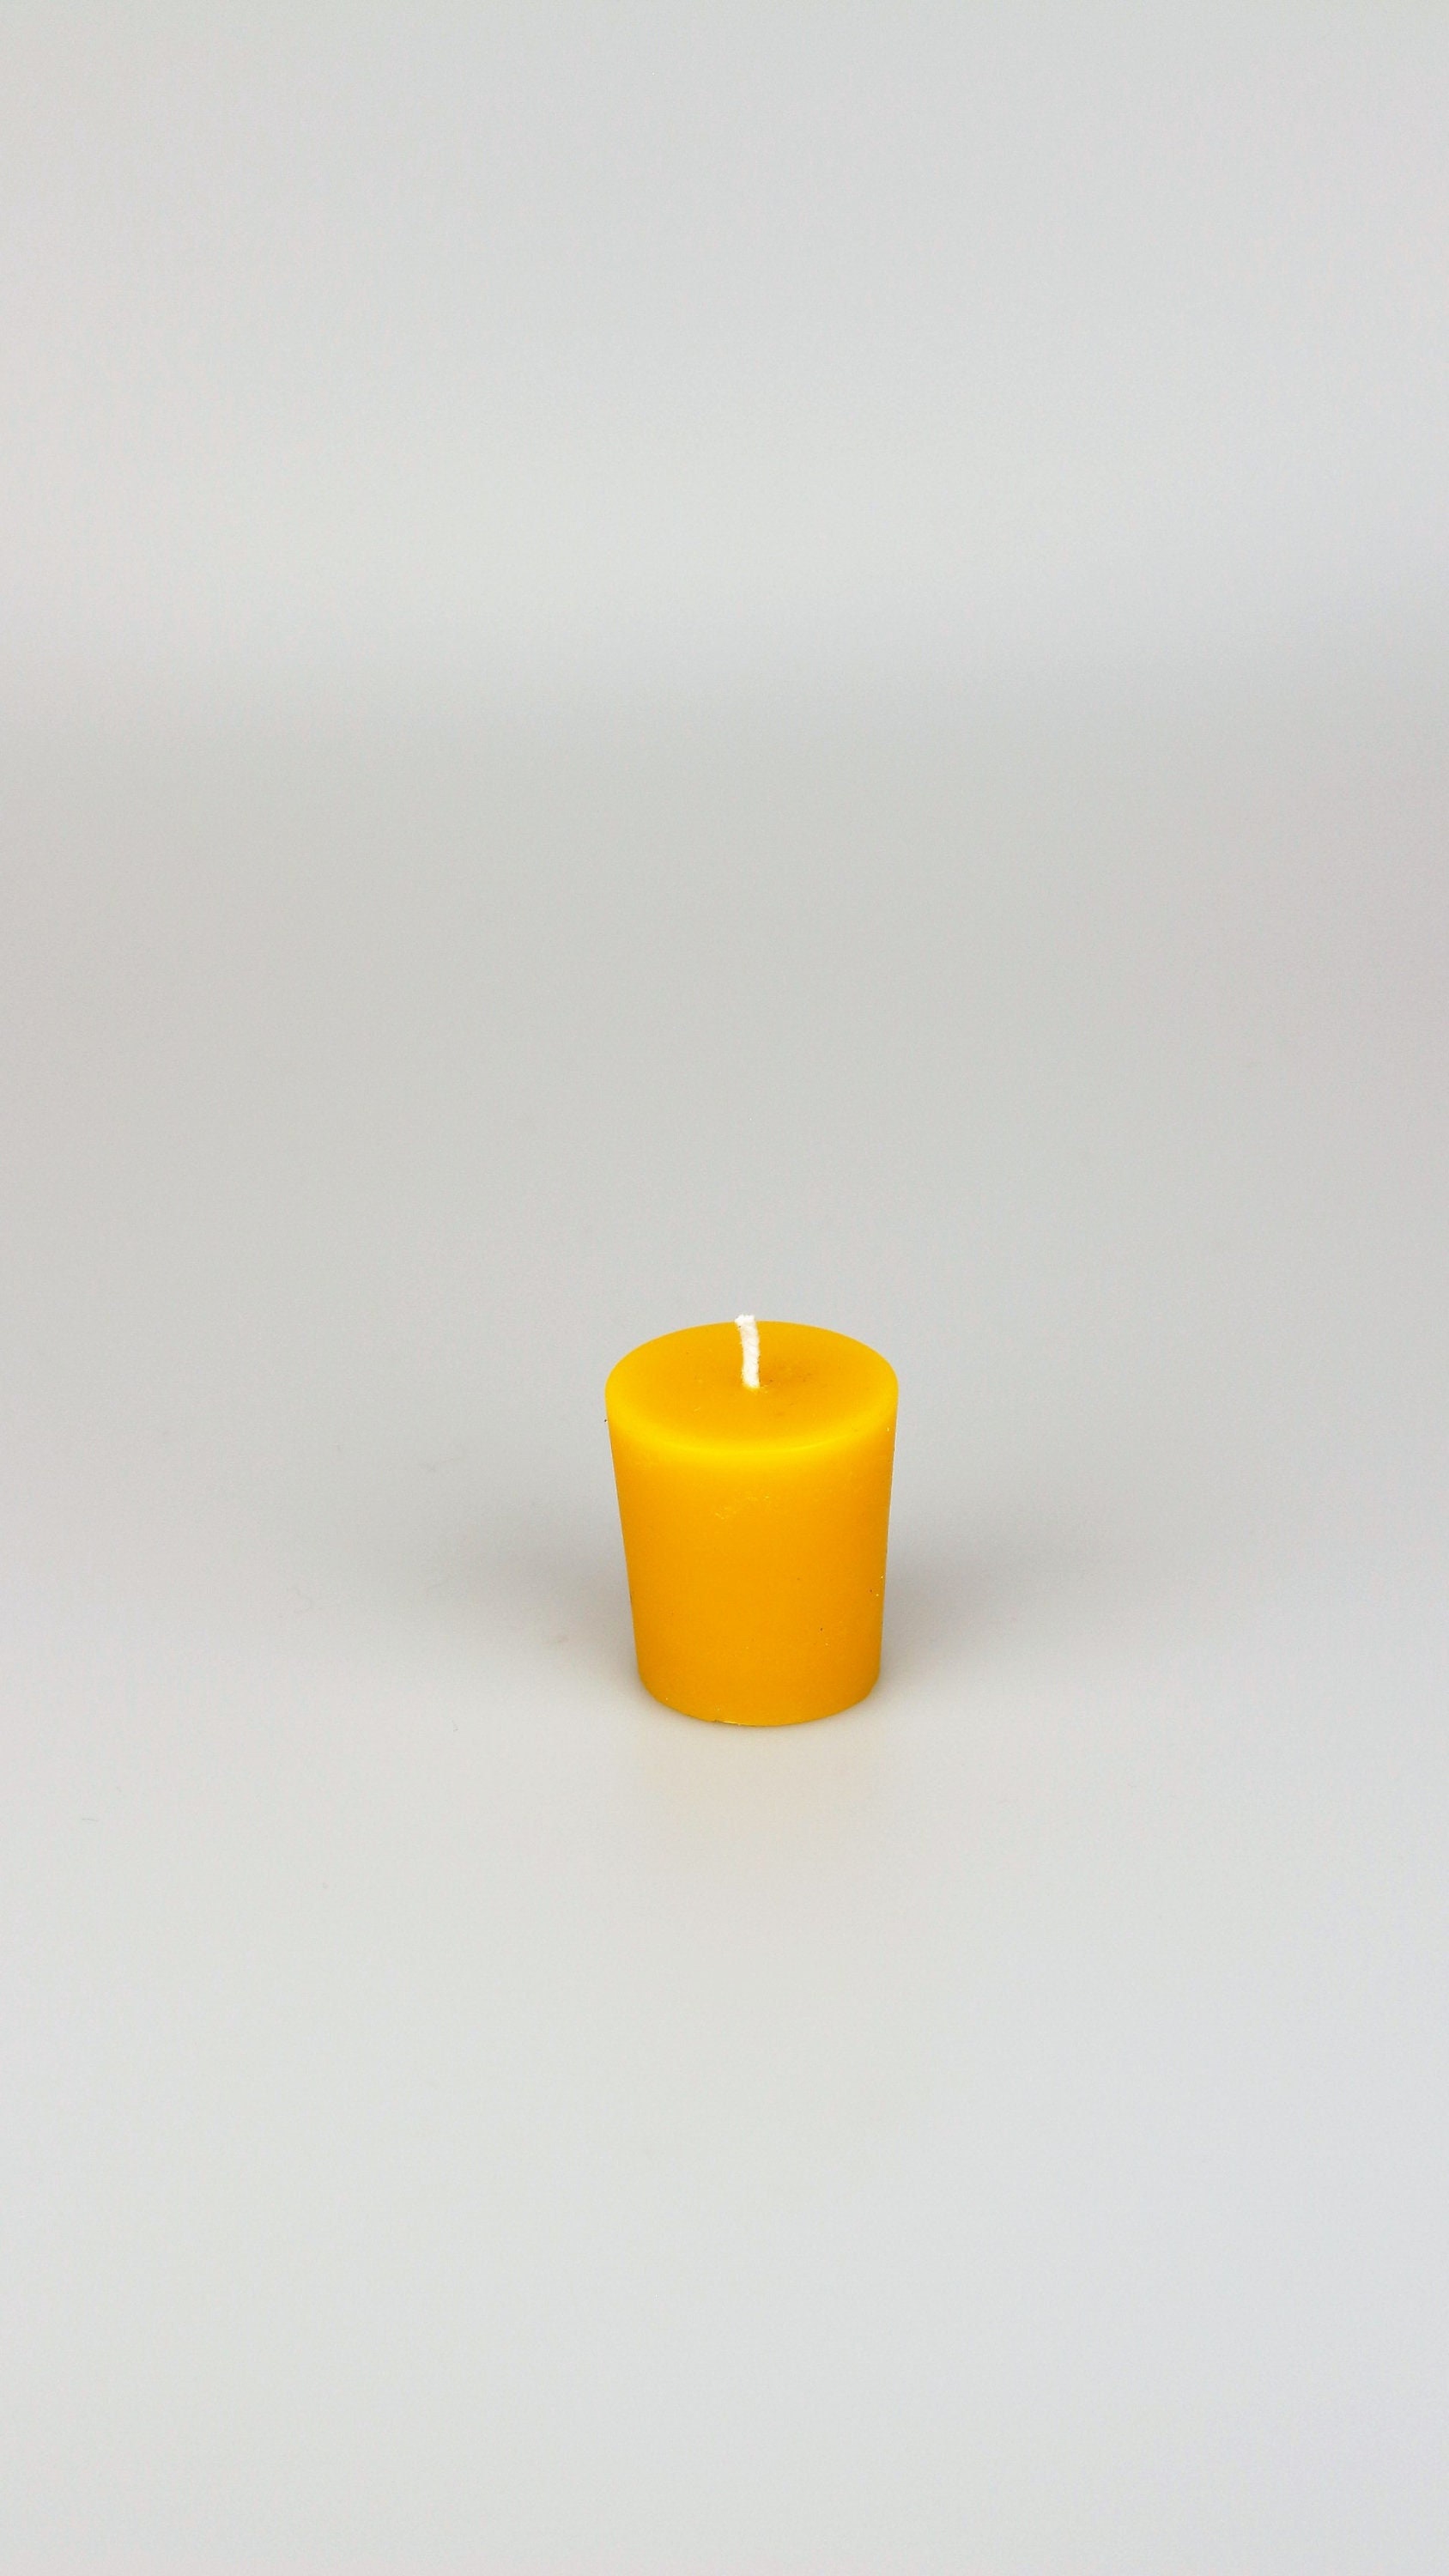 JUMIS Silicone Candle Molds for Beeswax, Eco-friendly, Reusable